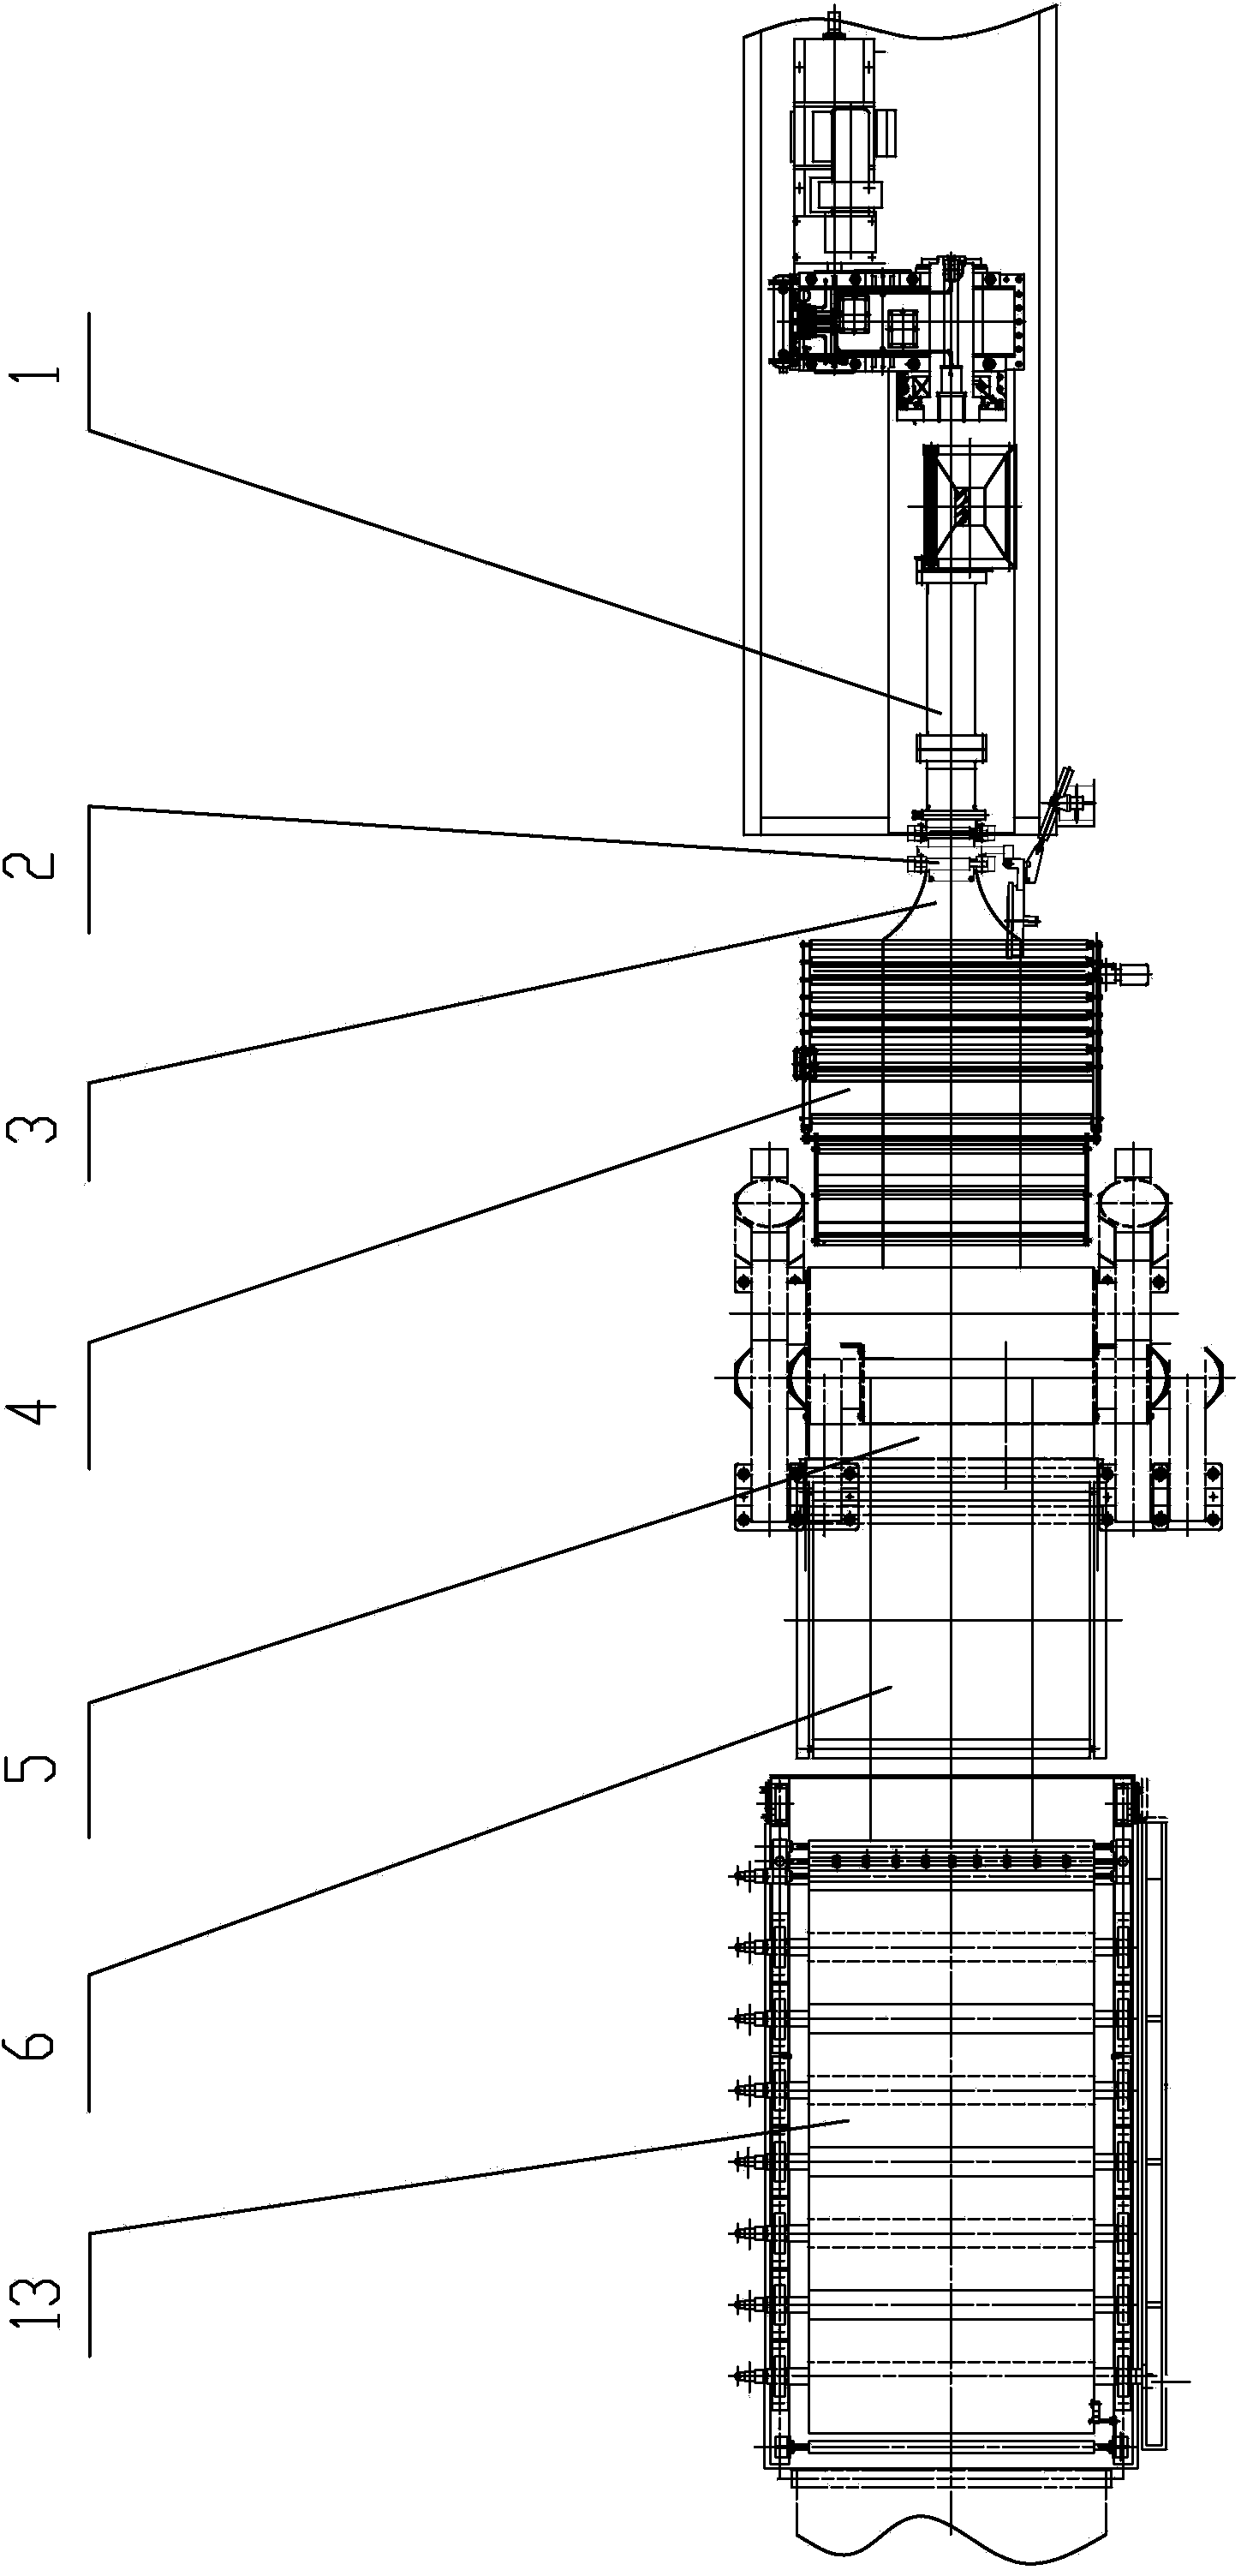 Machine head of rubber supply extruder of three-roller calender